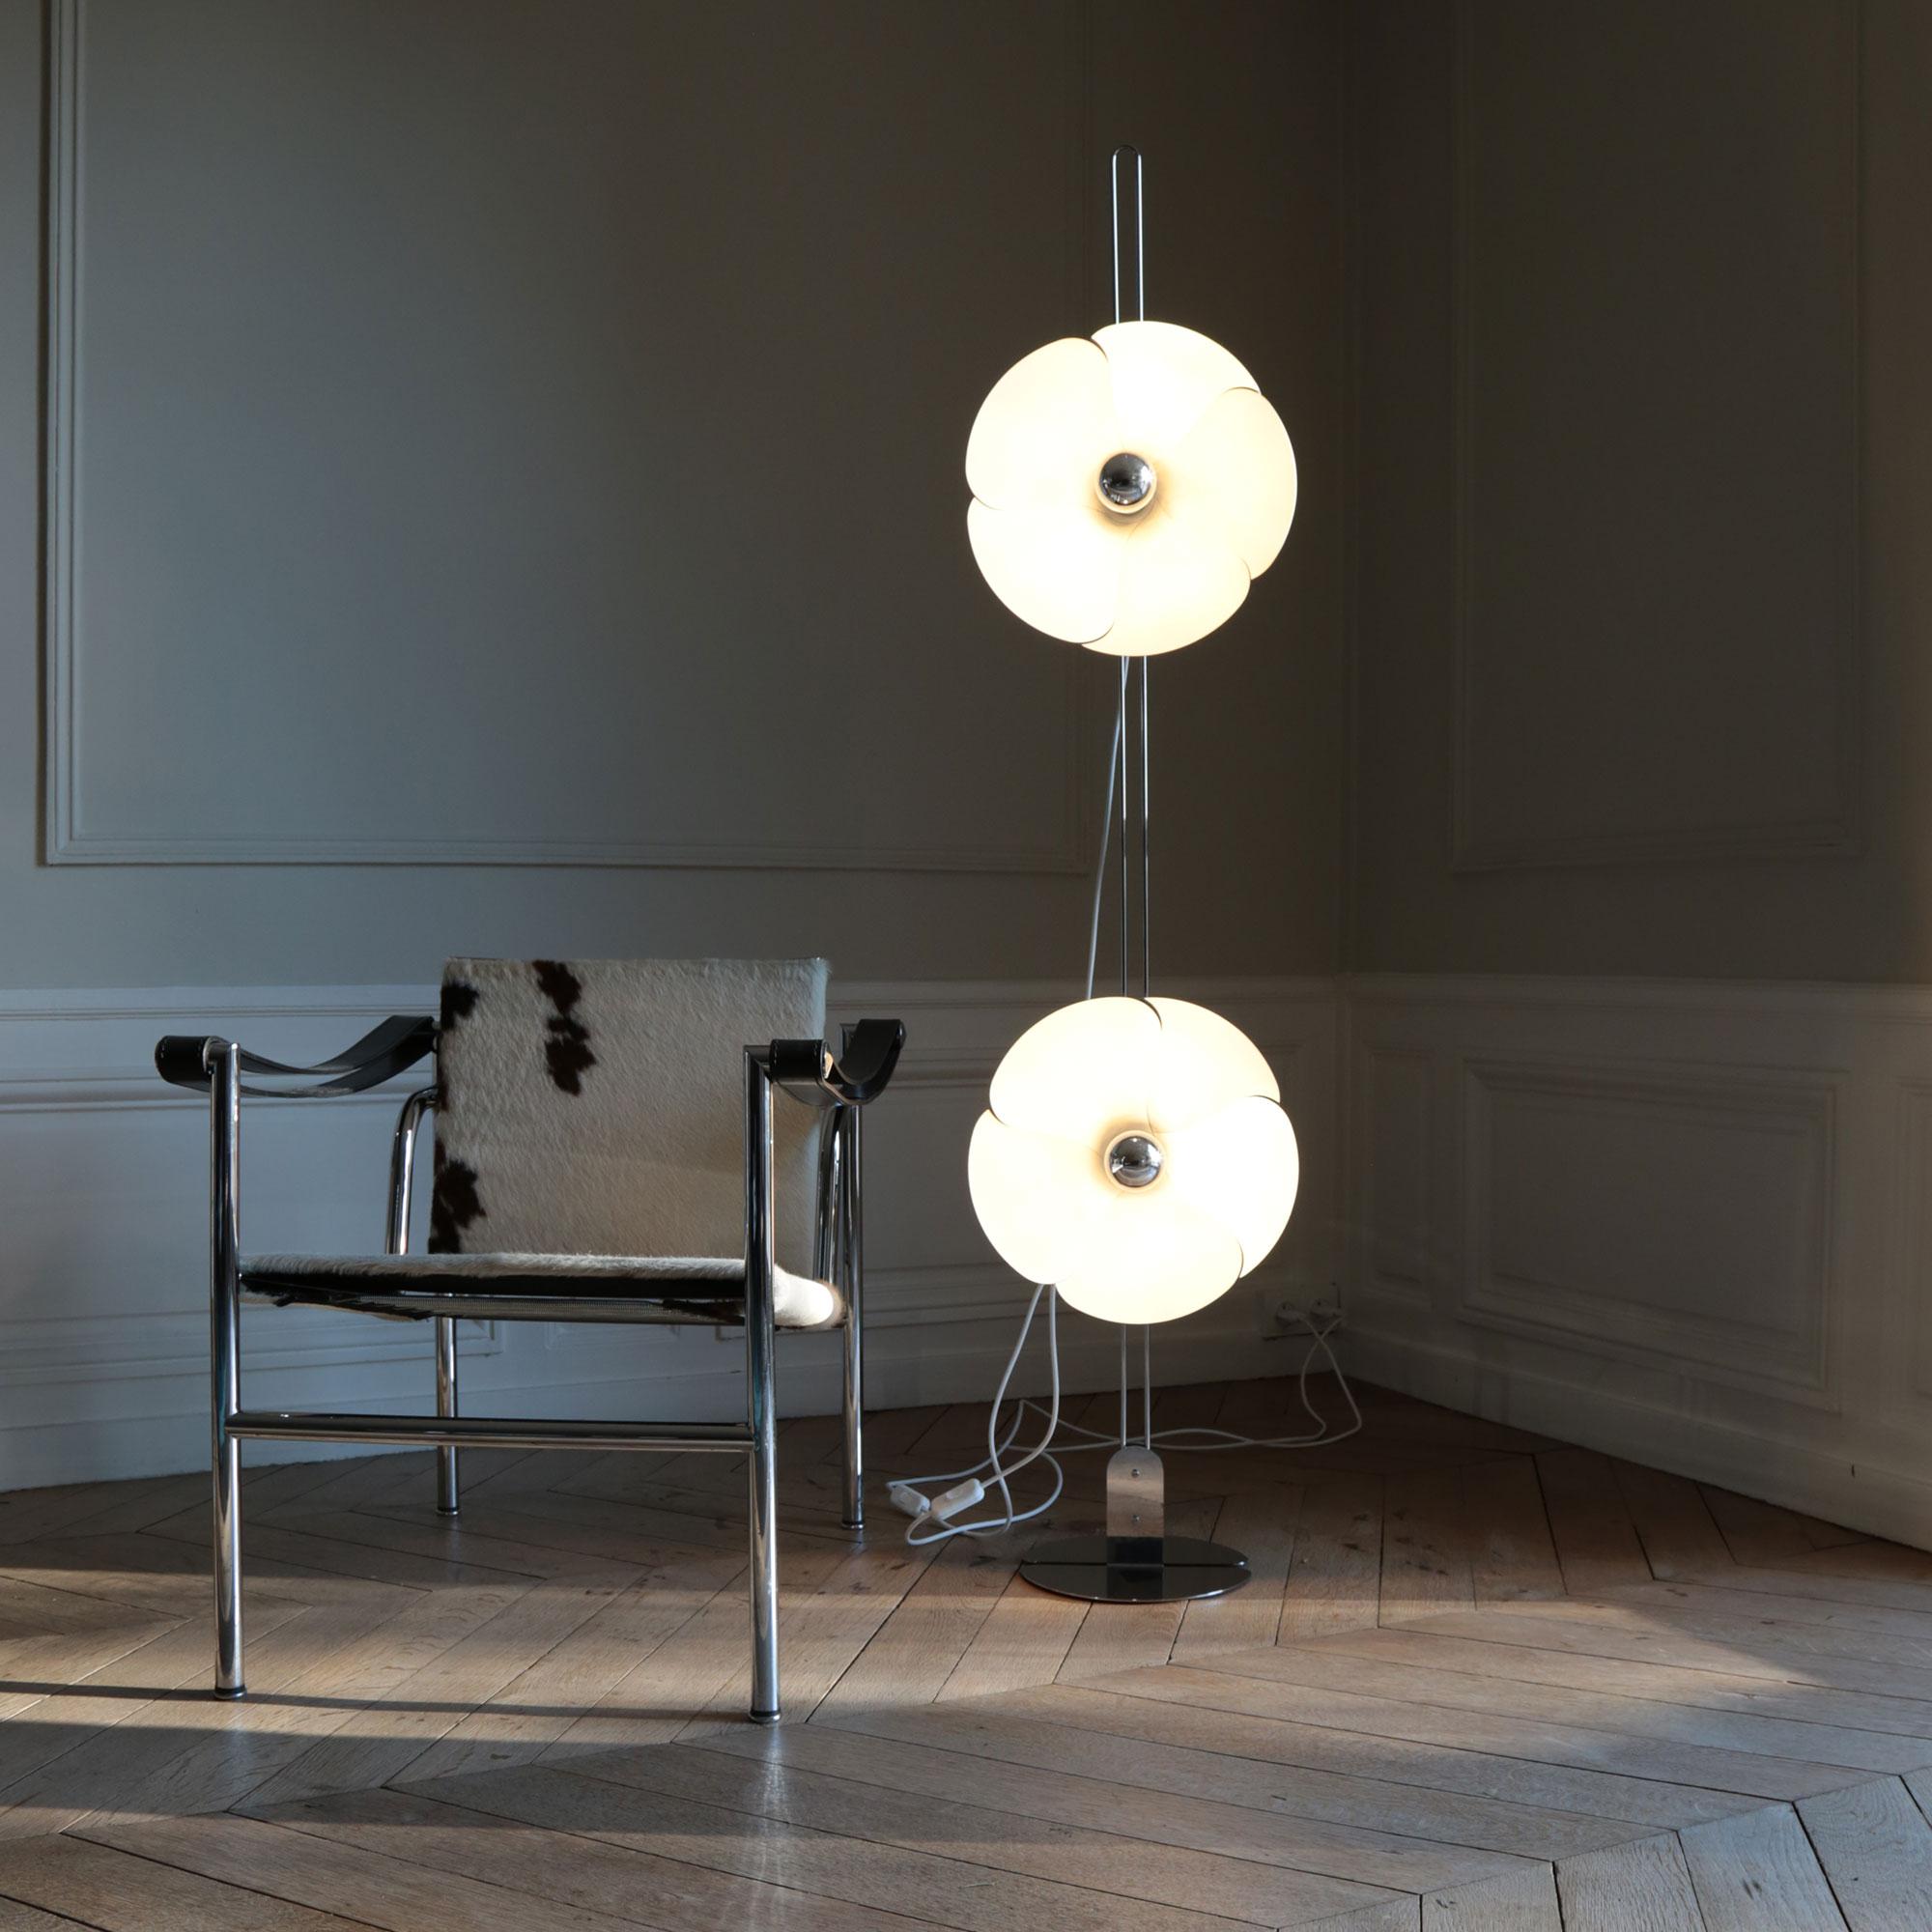 The standing flower designed by Olivier Mourgue for Disderot, 1968. This standing flower lamp with reflecting bulbs and 2 bent petals has flowers positioned on a chrome wire with a round divided base.
Pascal and Olivier Mourgue are two French